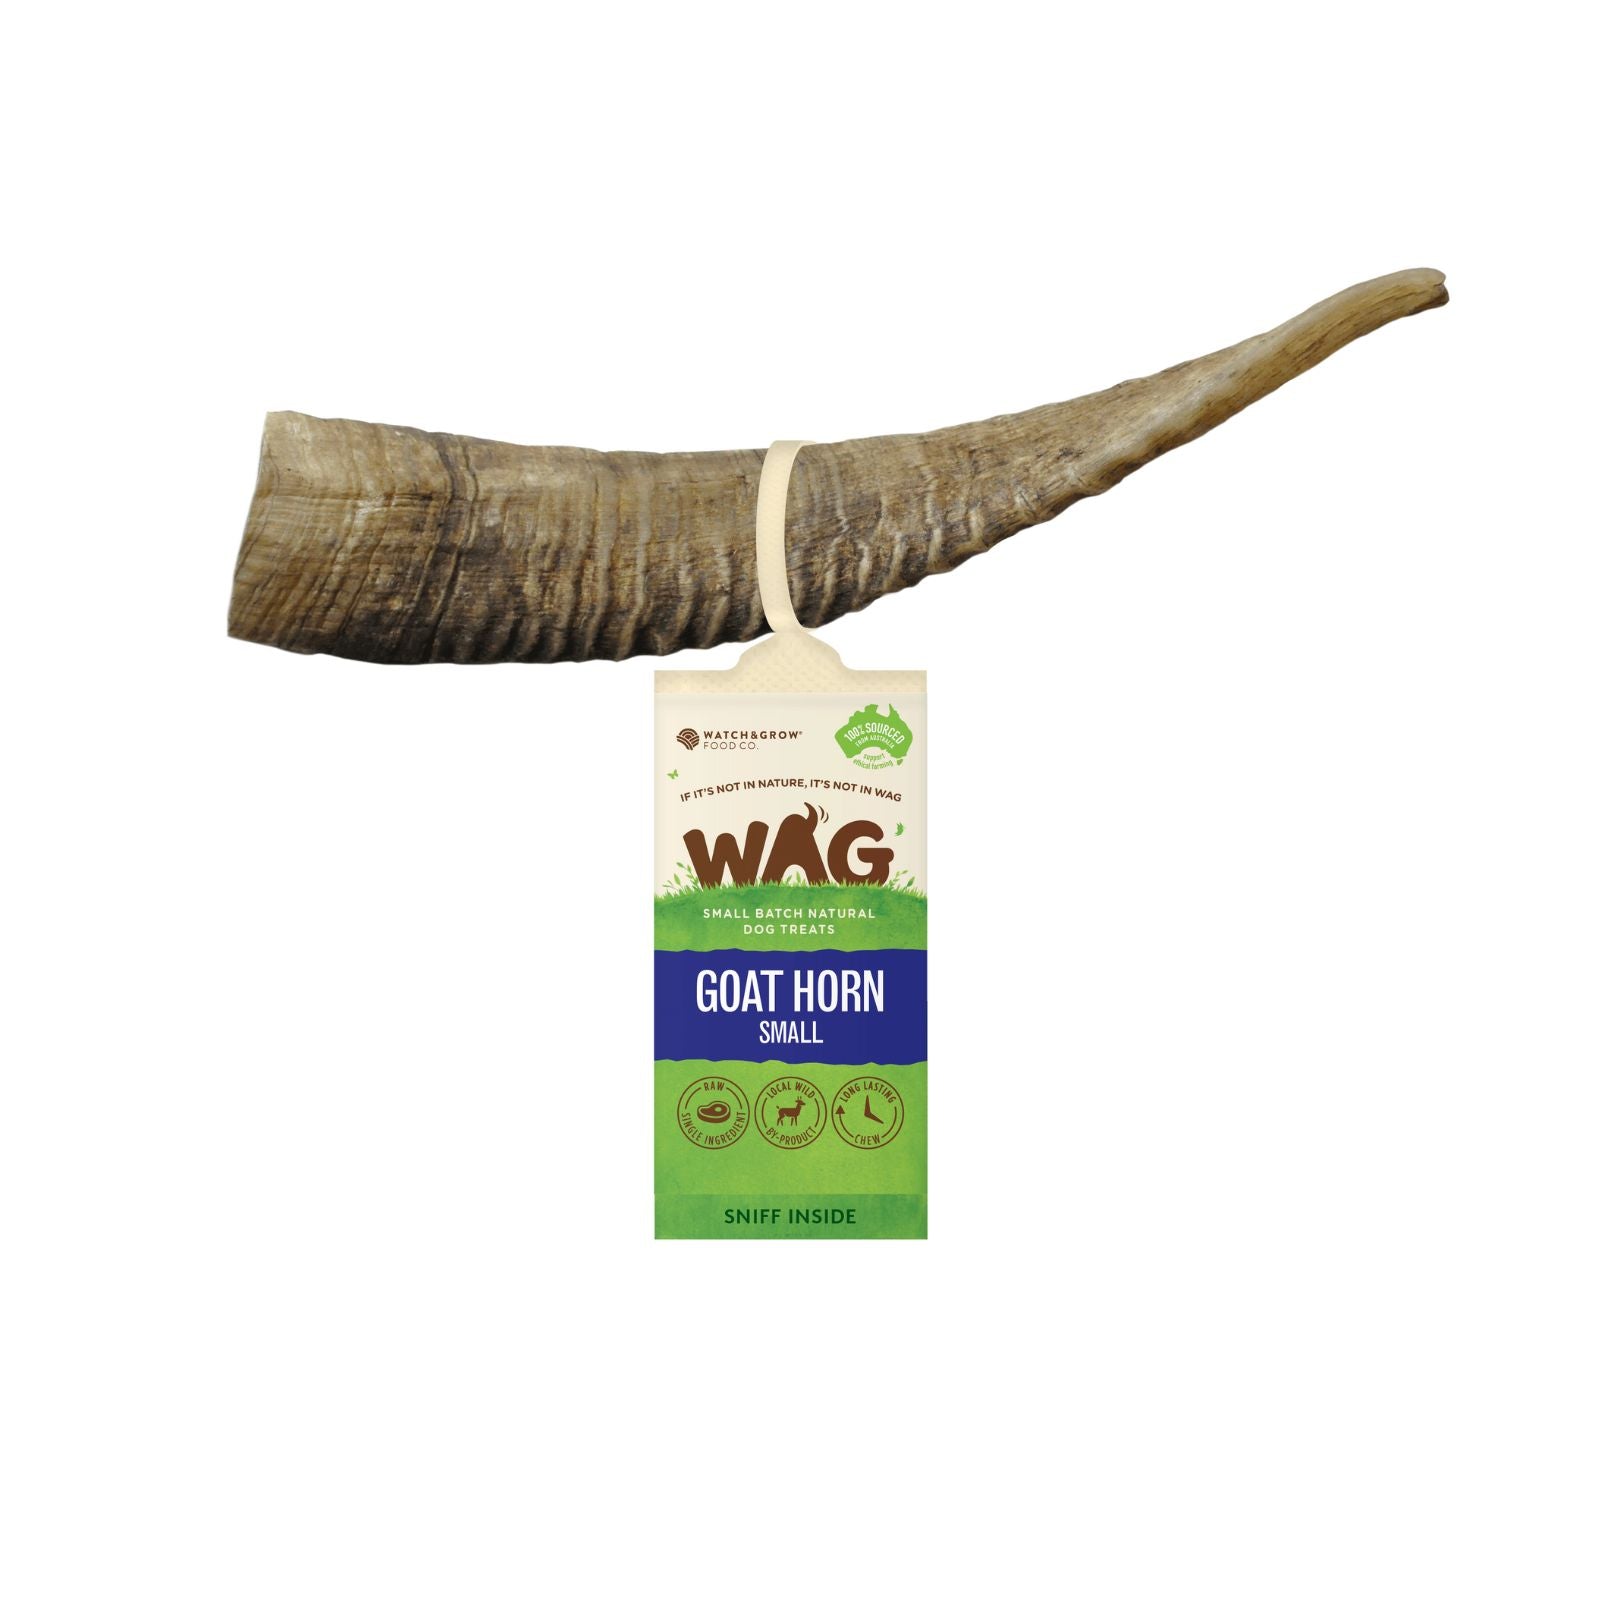 WAG Australian Goat Horn small chew treat for dogs.